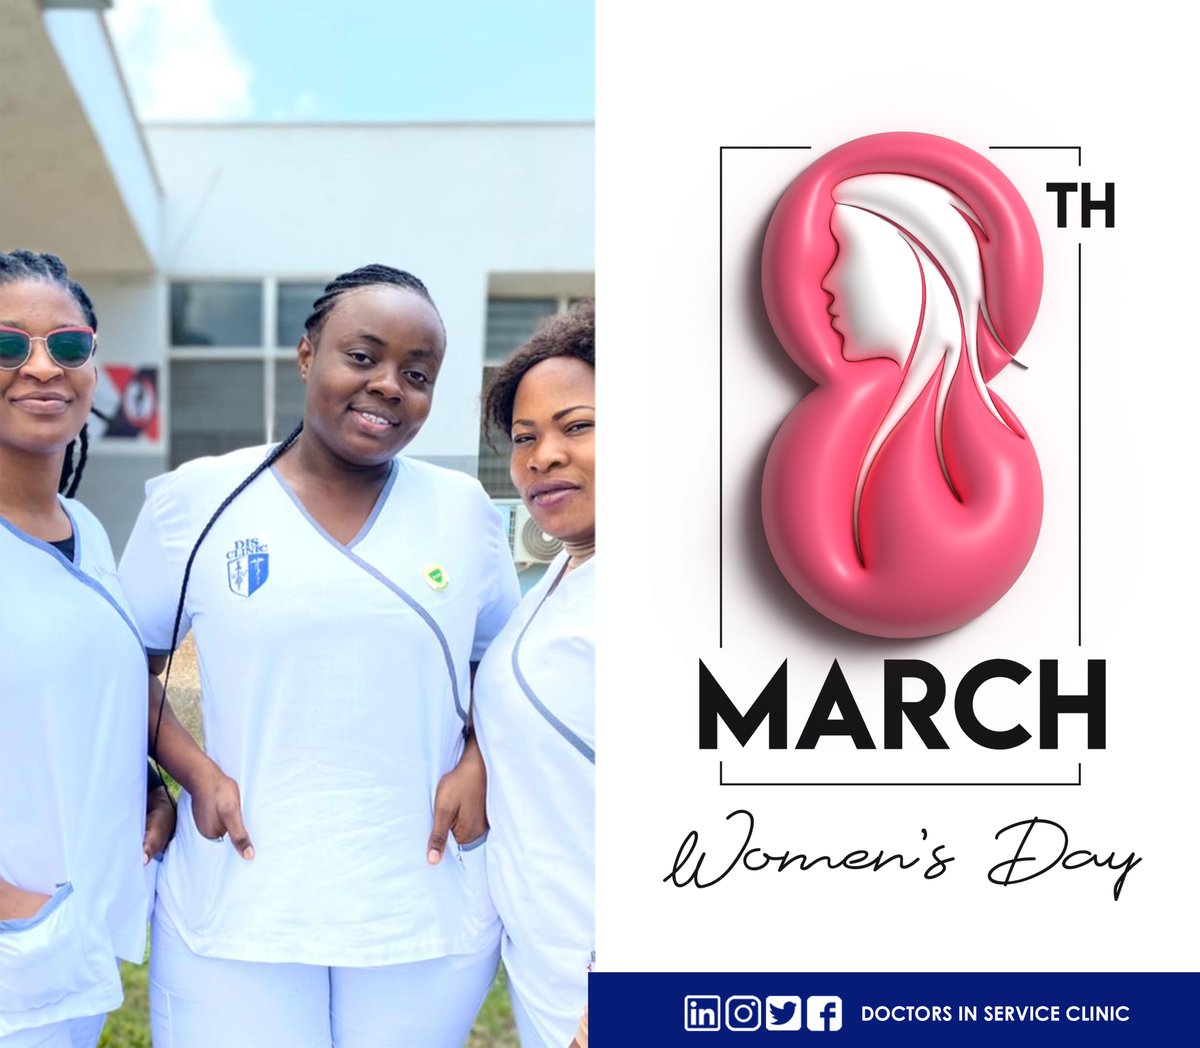 Celebrating the strength and compassion of women worldwide on this #InternationalWomensDay. 🌍 To all the women in healthcare who heal, inspire, and lead - your resilience powers our community. Thank you for being the heartbeat of our hospital. 💖 #IWD2024 #HealthcareHeroes